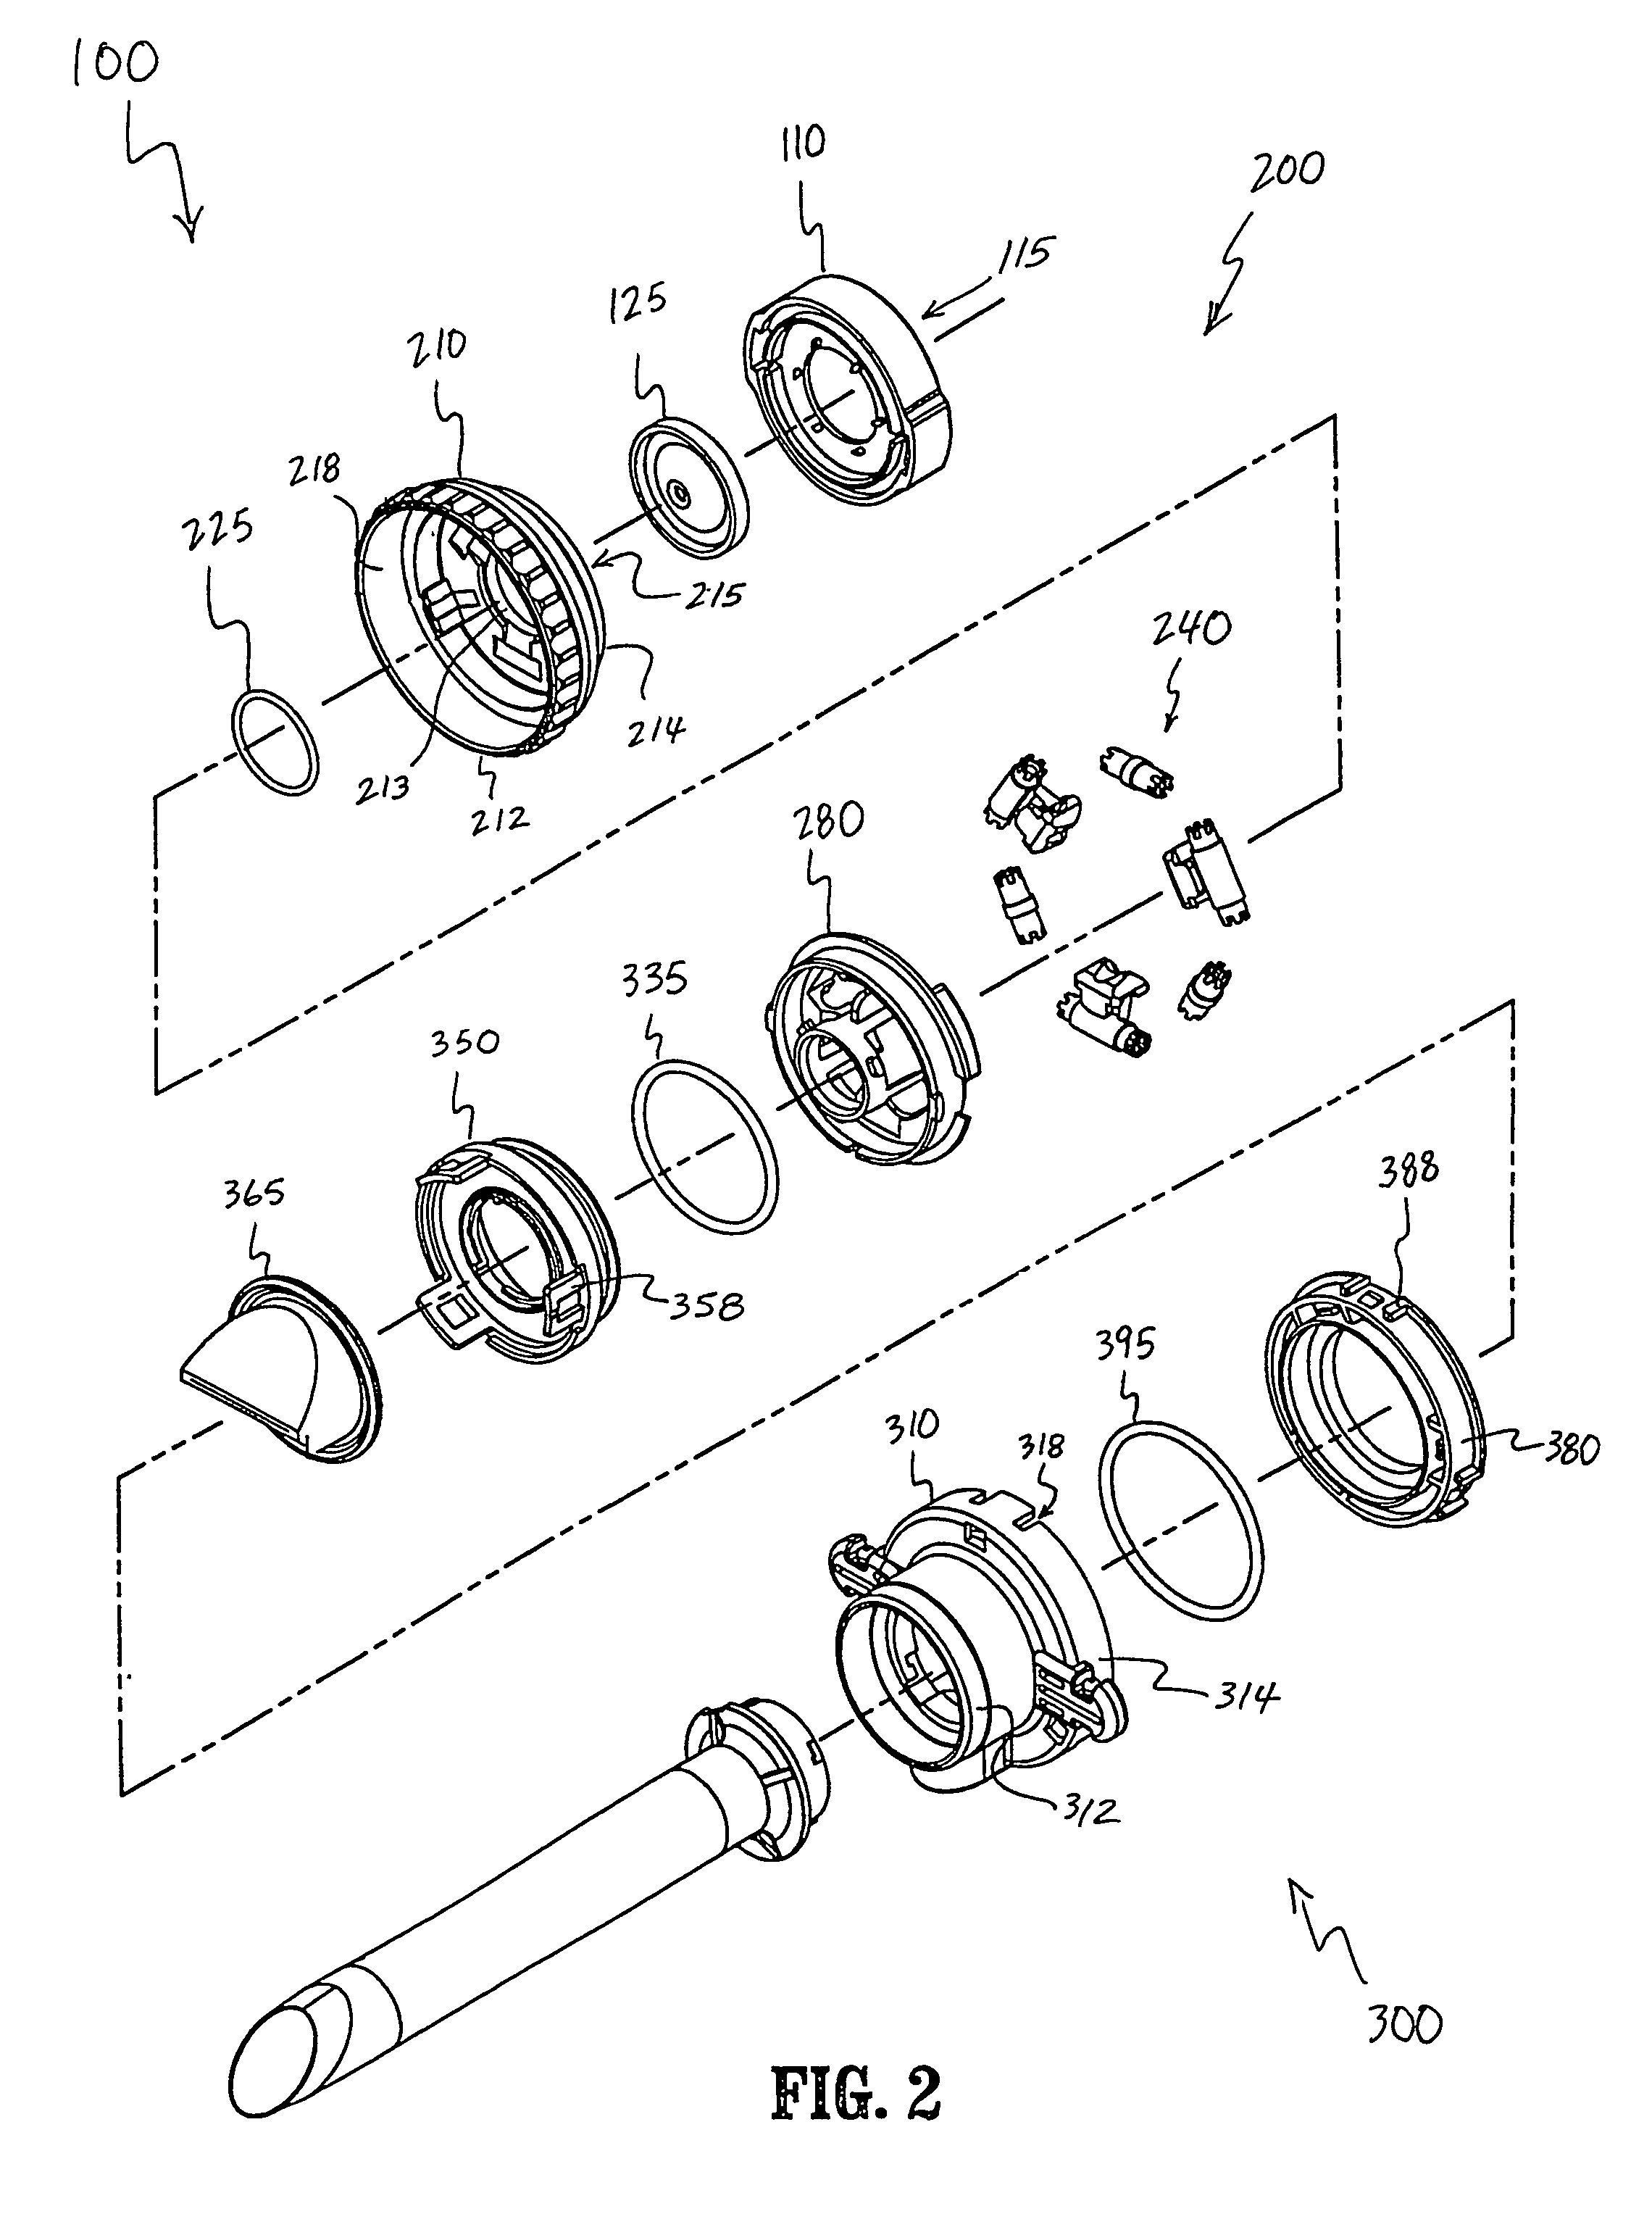 Valve assembly including diameter reduction structure for trocar